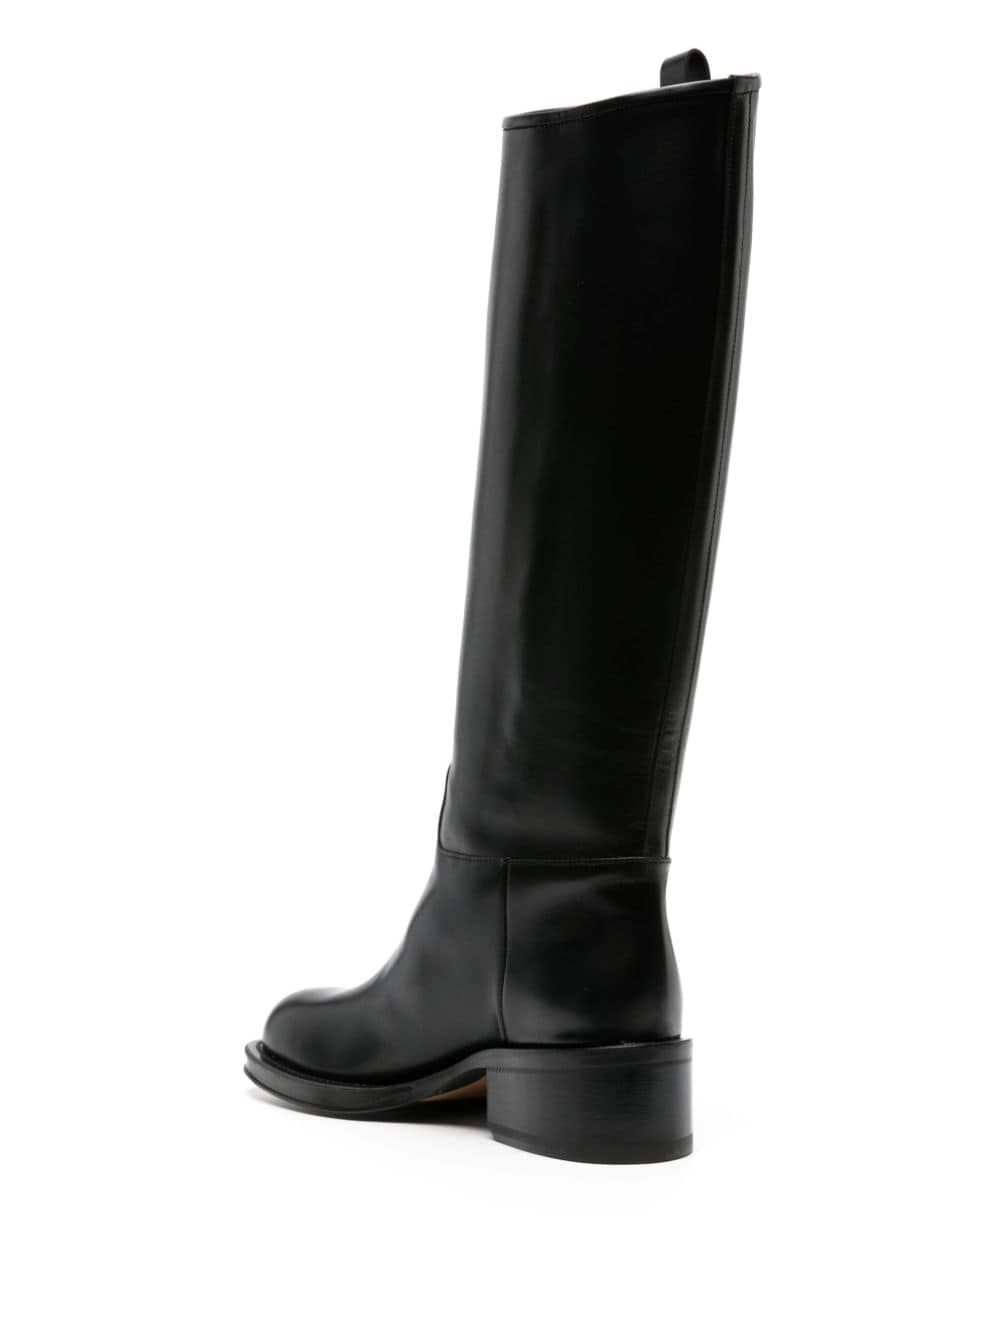 Medley Riding leather boots - 3